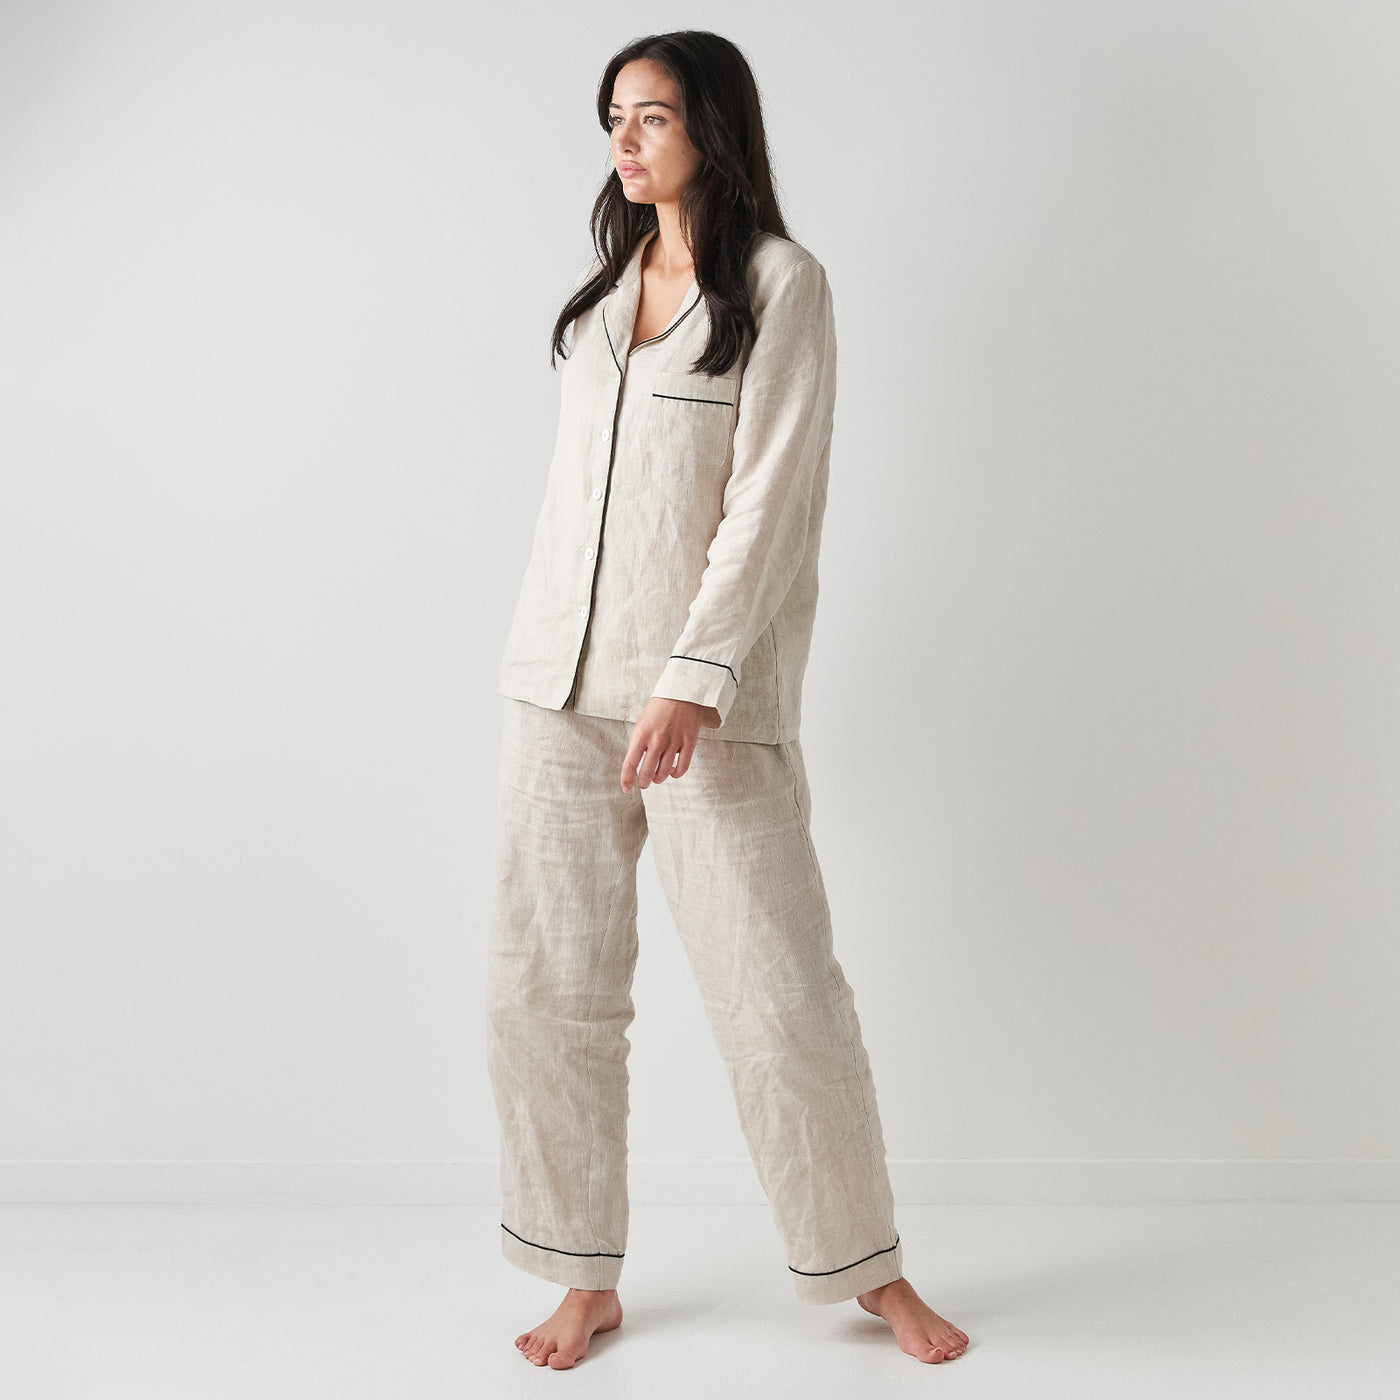 French Flax Linen Pyjama Set in Natural